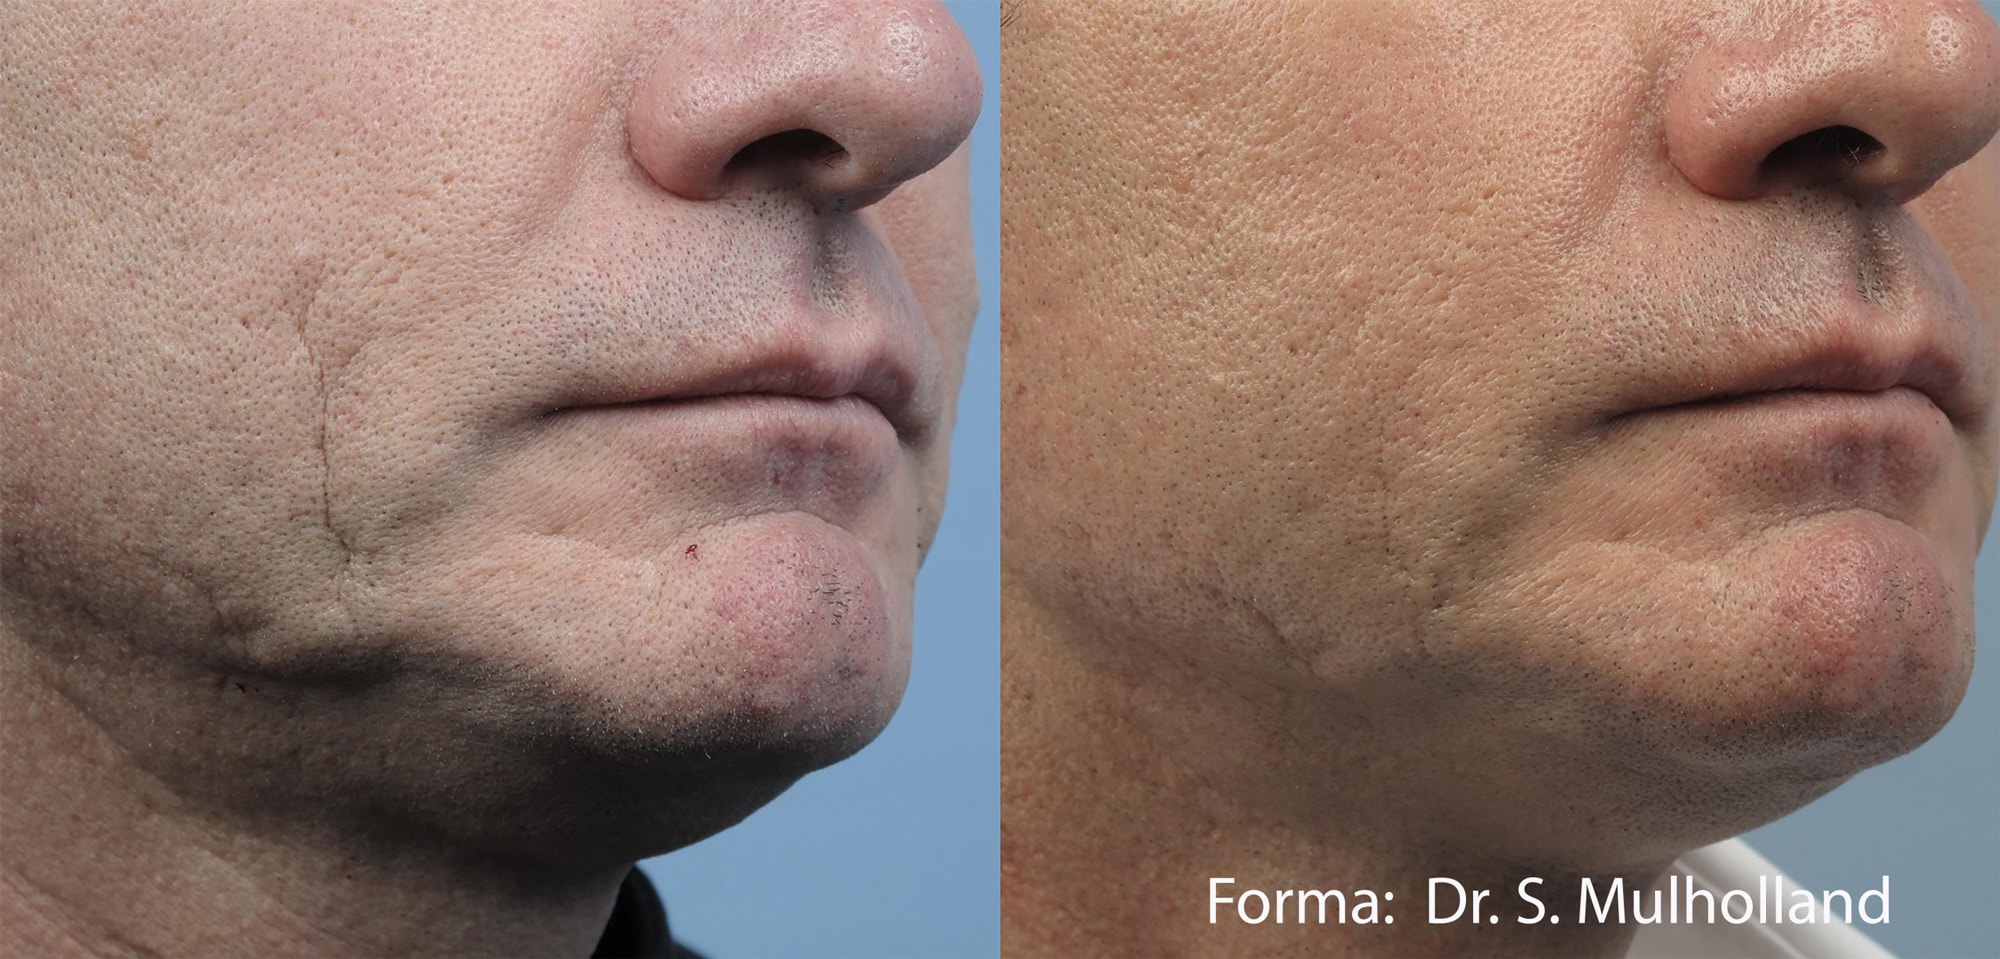 Before and After photos of Forma treatments improving the jawline and reducing the prominence of scars on a man’s face